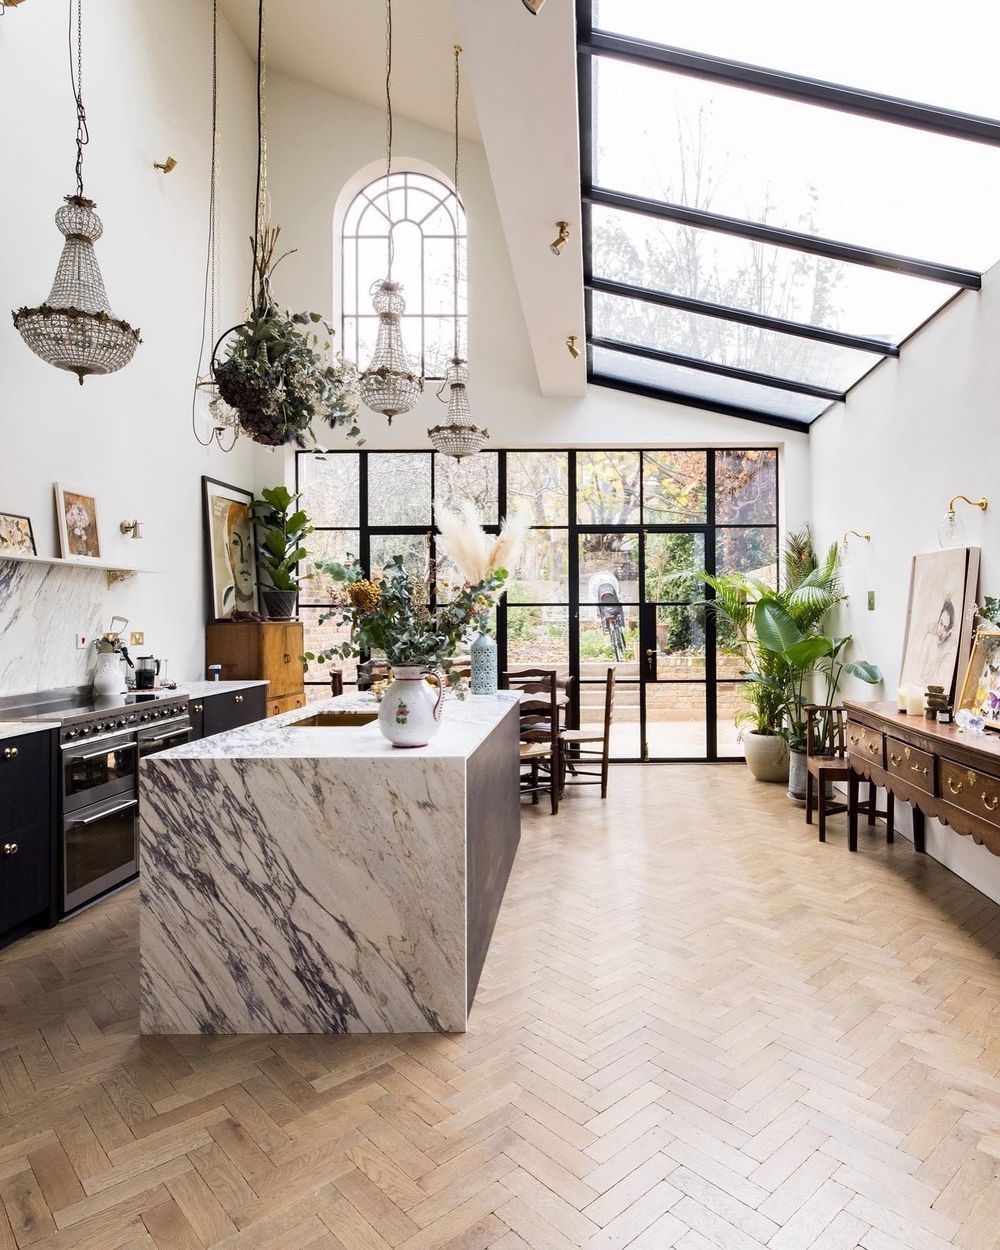 Marble kitchen island London @_all.the.things.i.love_ @plumguide